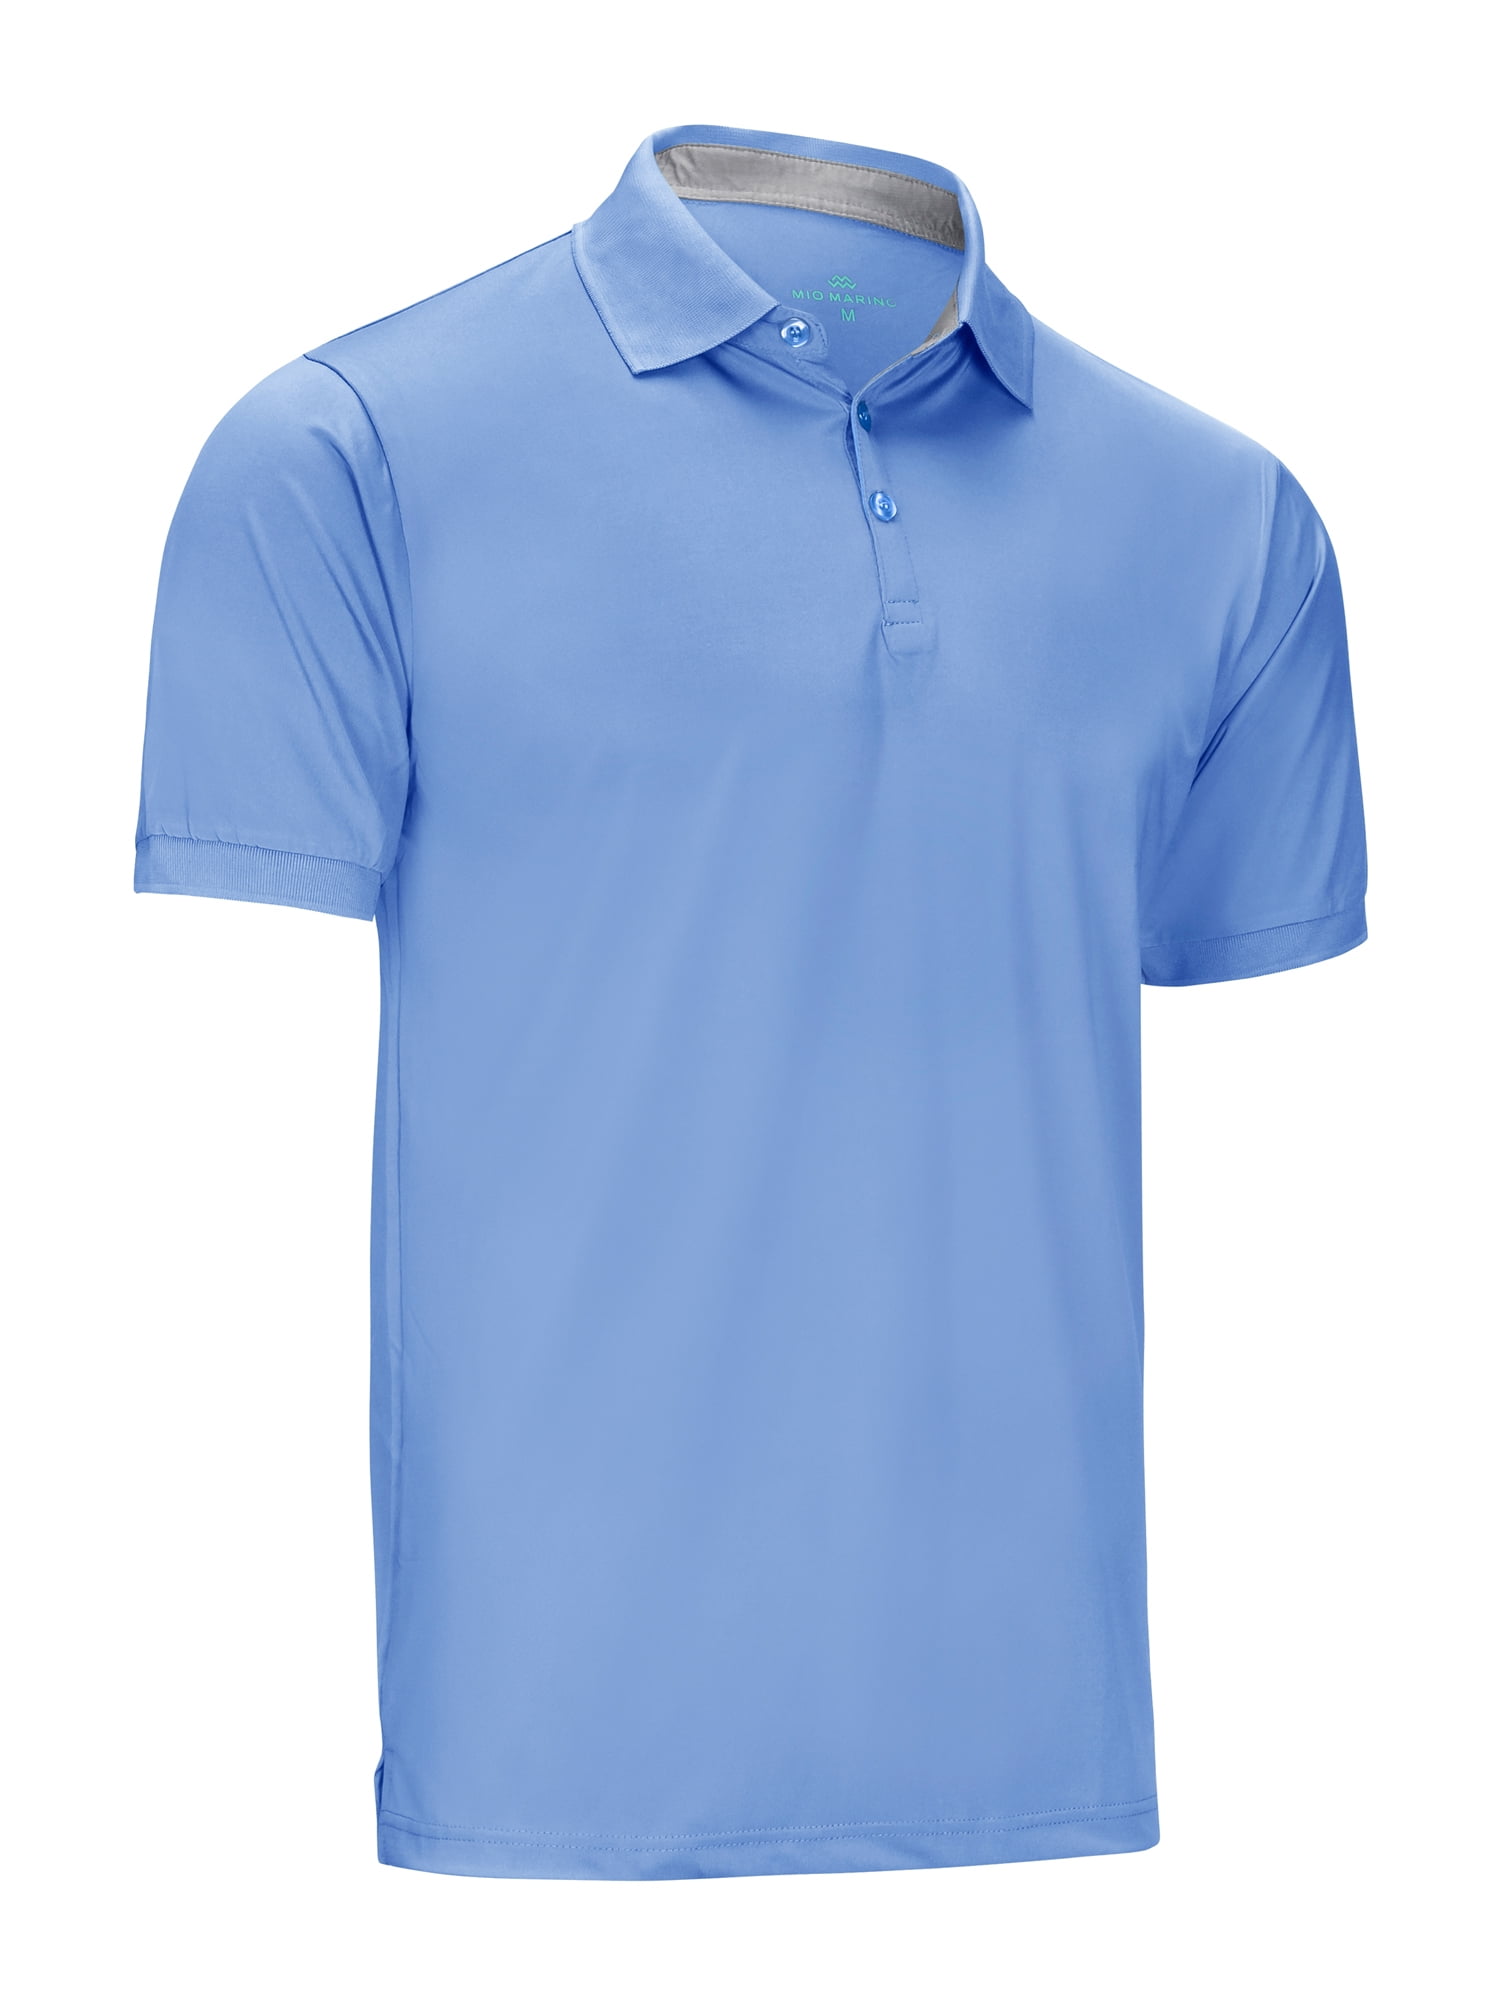 Mio Marino Golf Polo Shirts For Men, Regular-fit Quick-Dry Mens ...